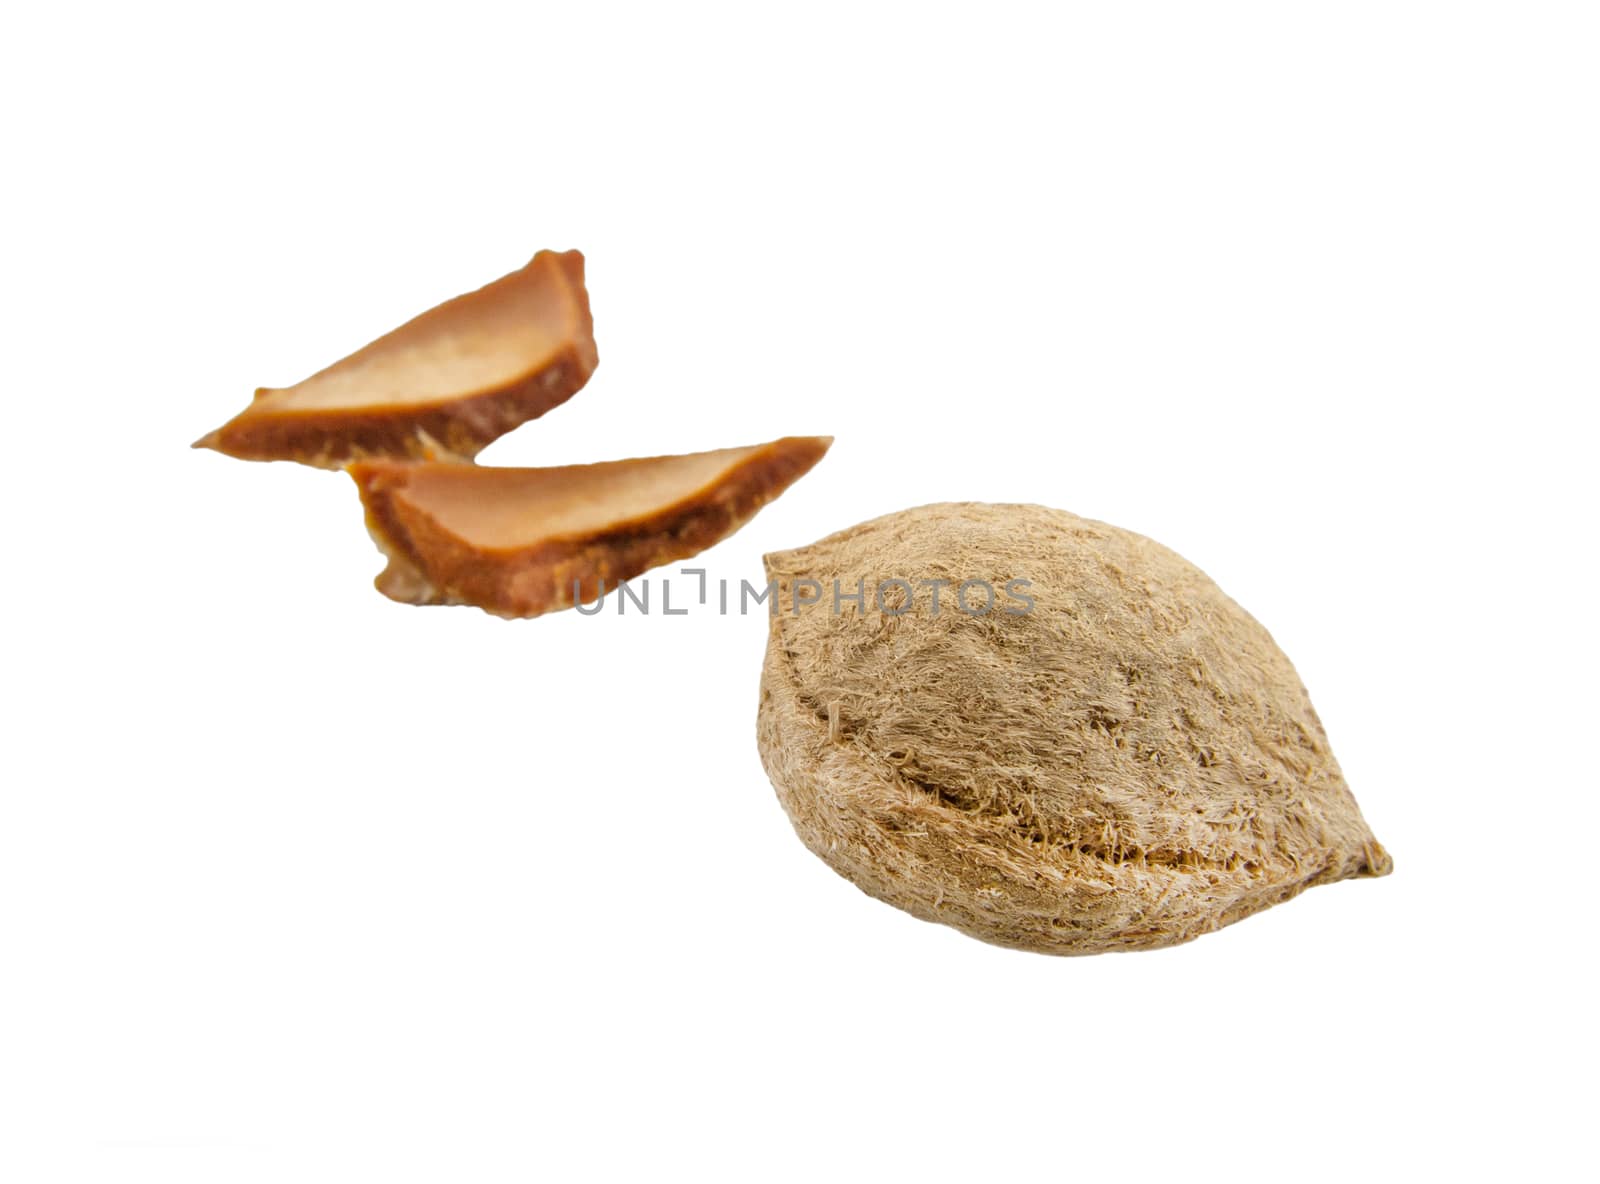 Nut isoleted on white background shoot soft focus,clipping paths